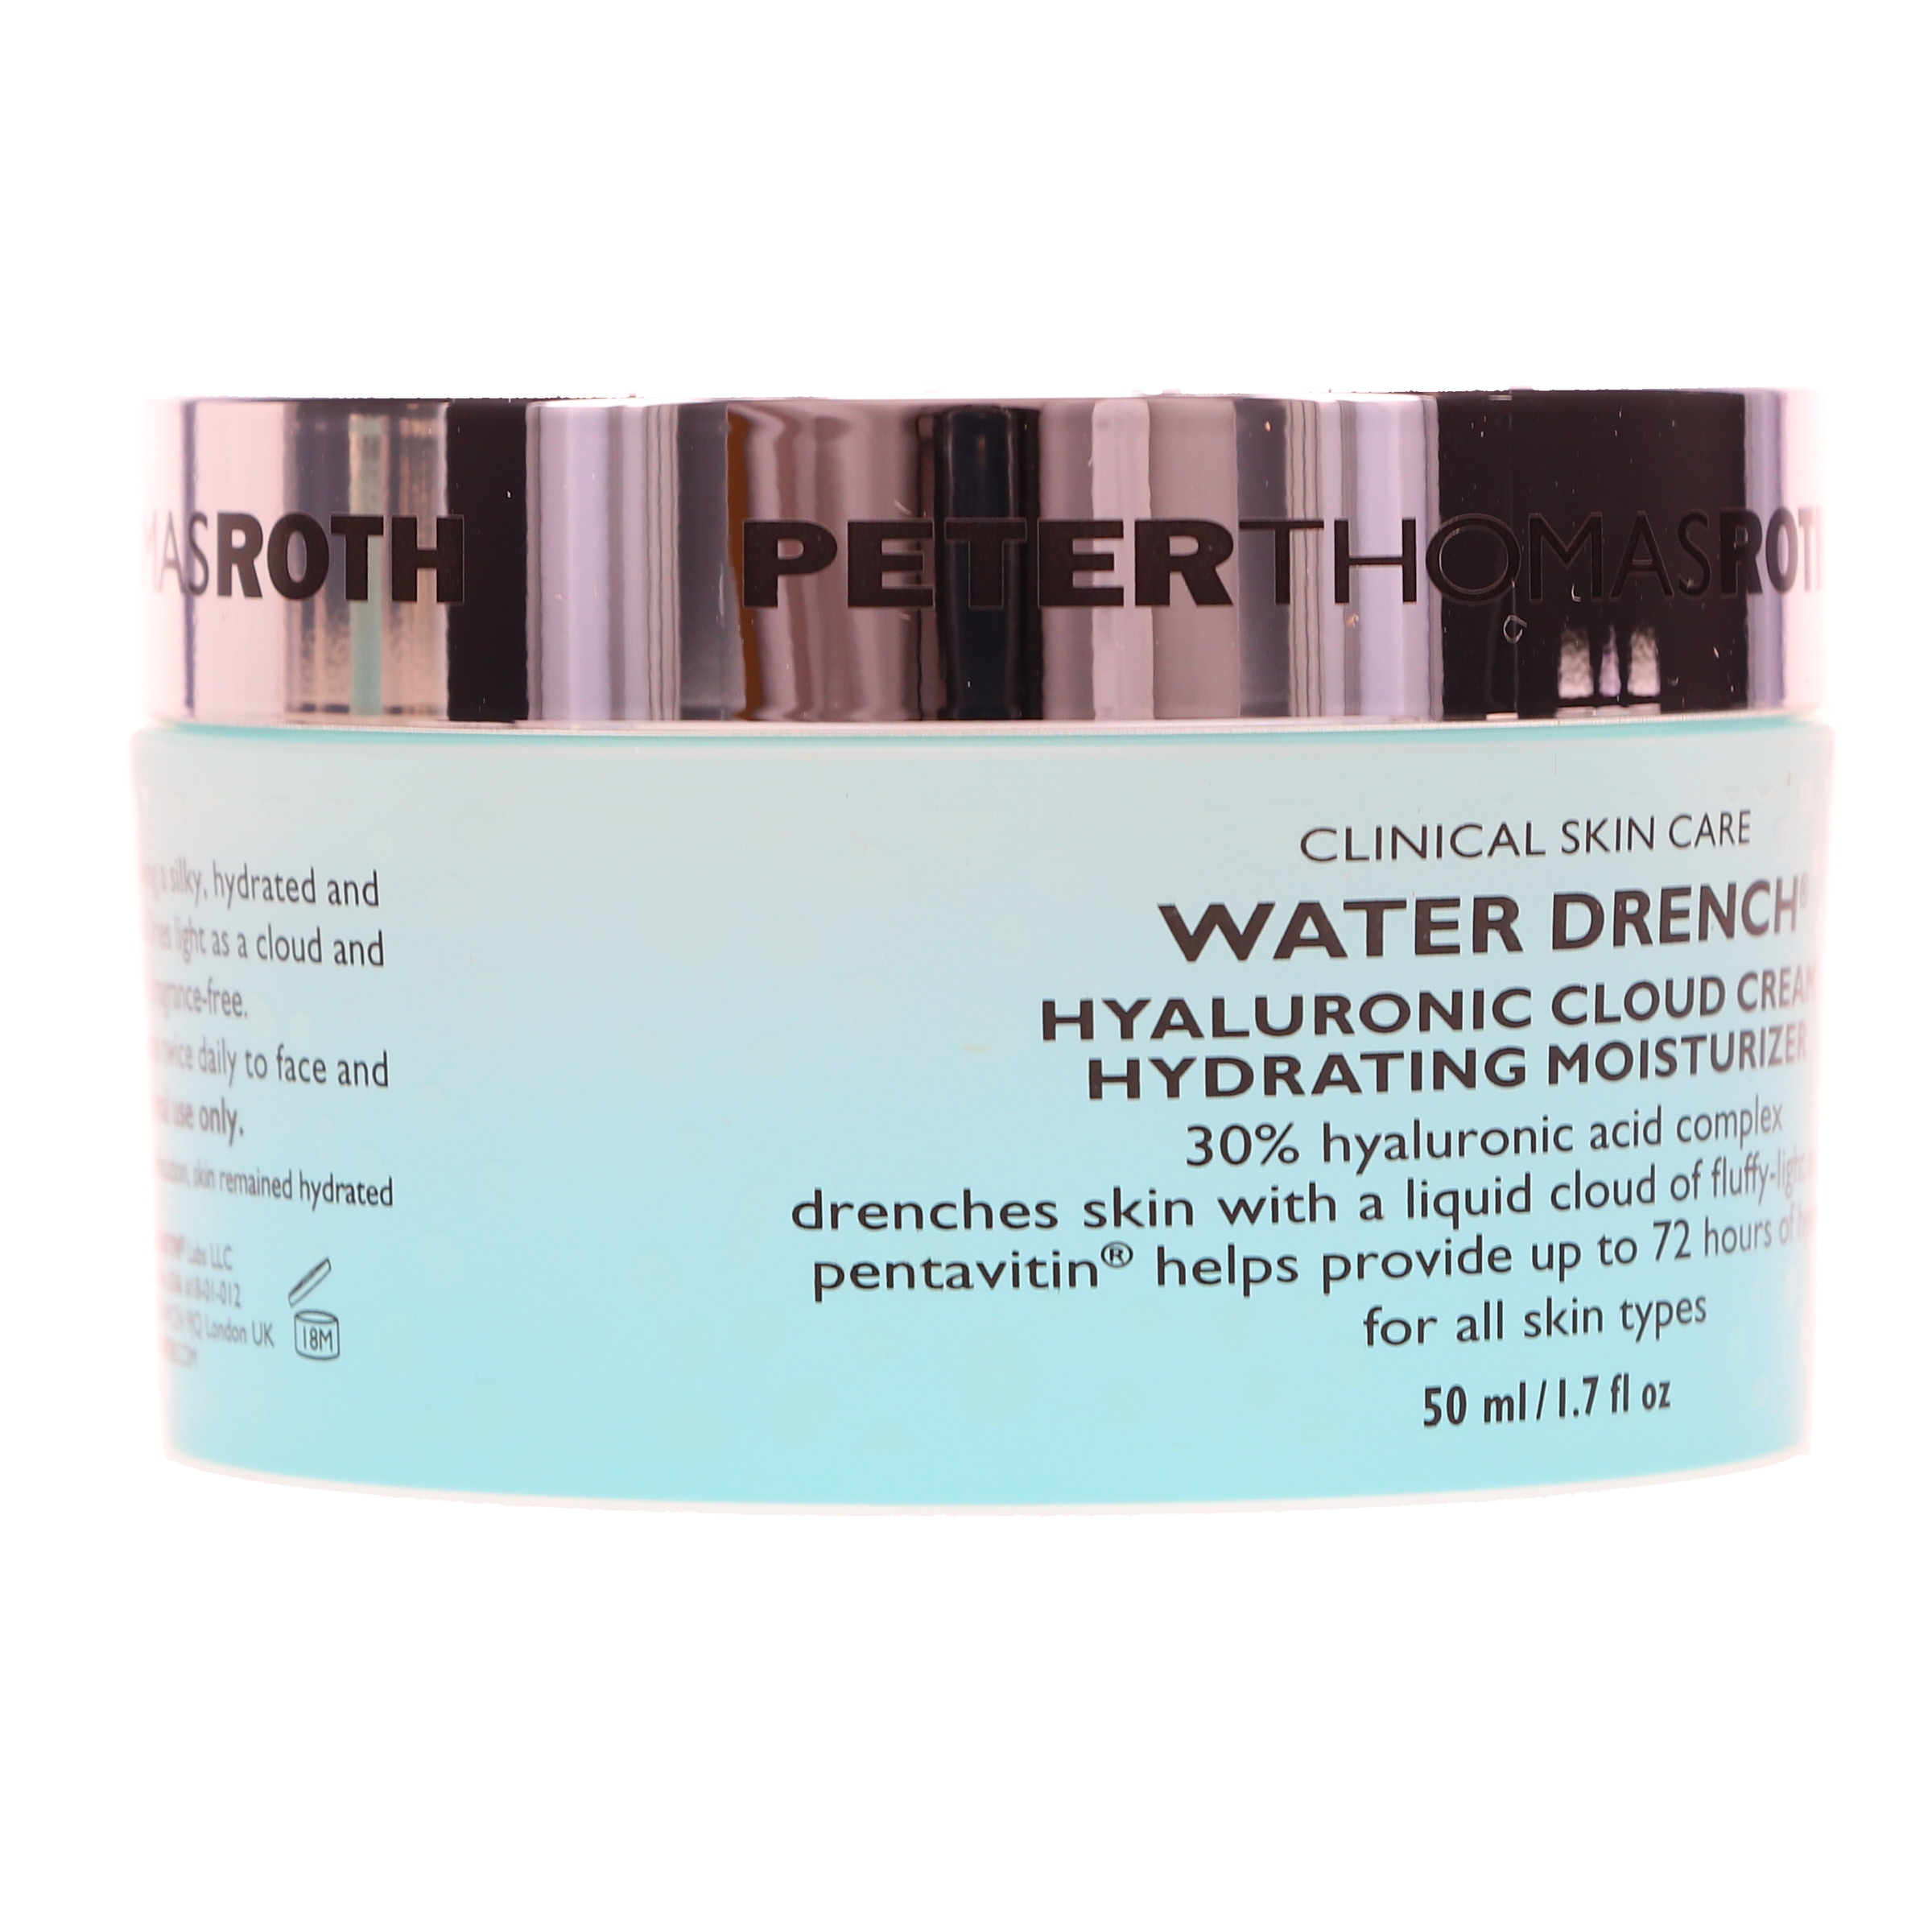 Water Drench Hyaluronic Cloud Cream - image 6 of 8